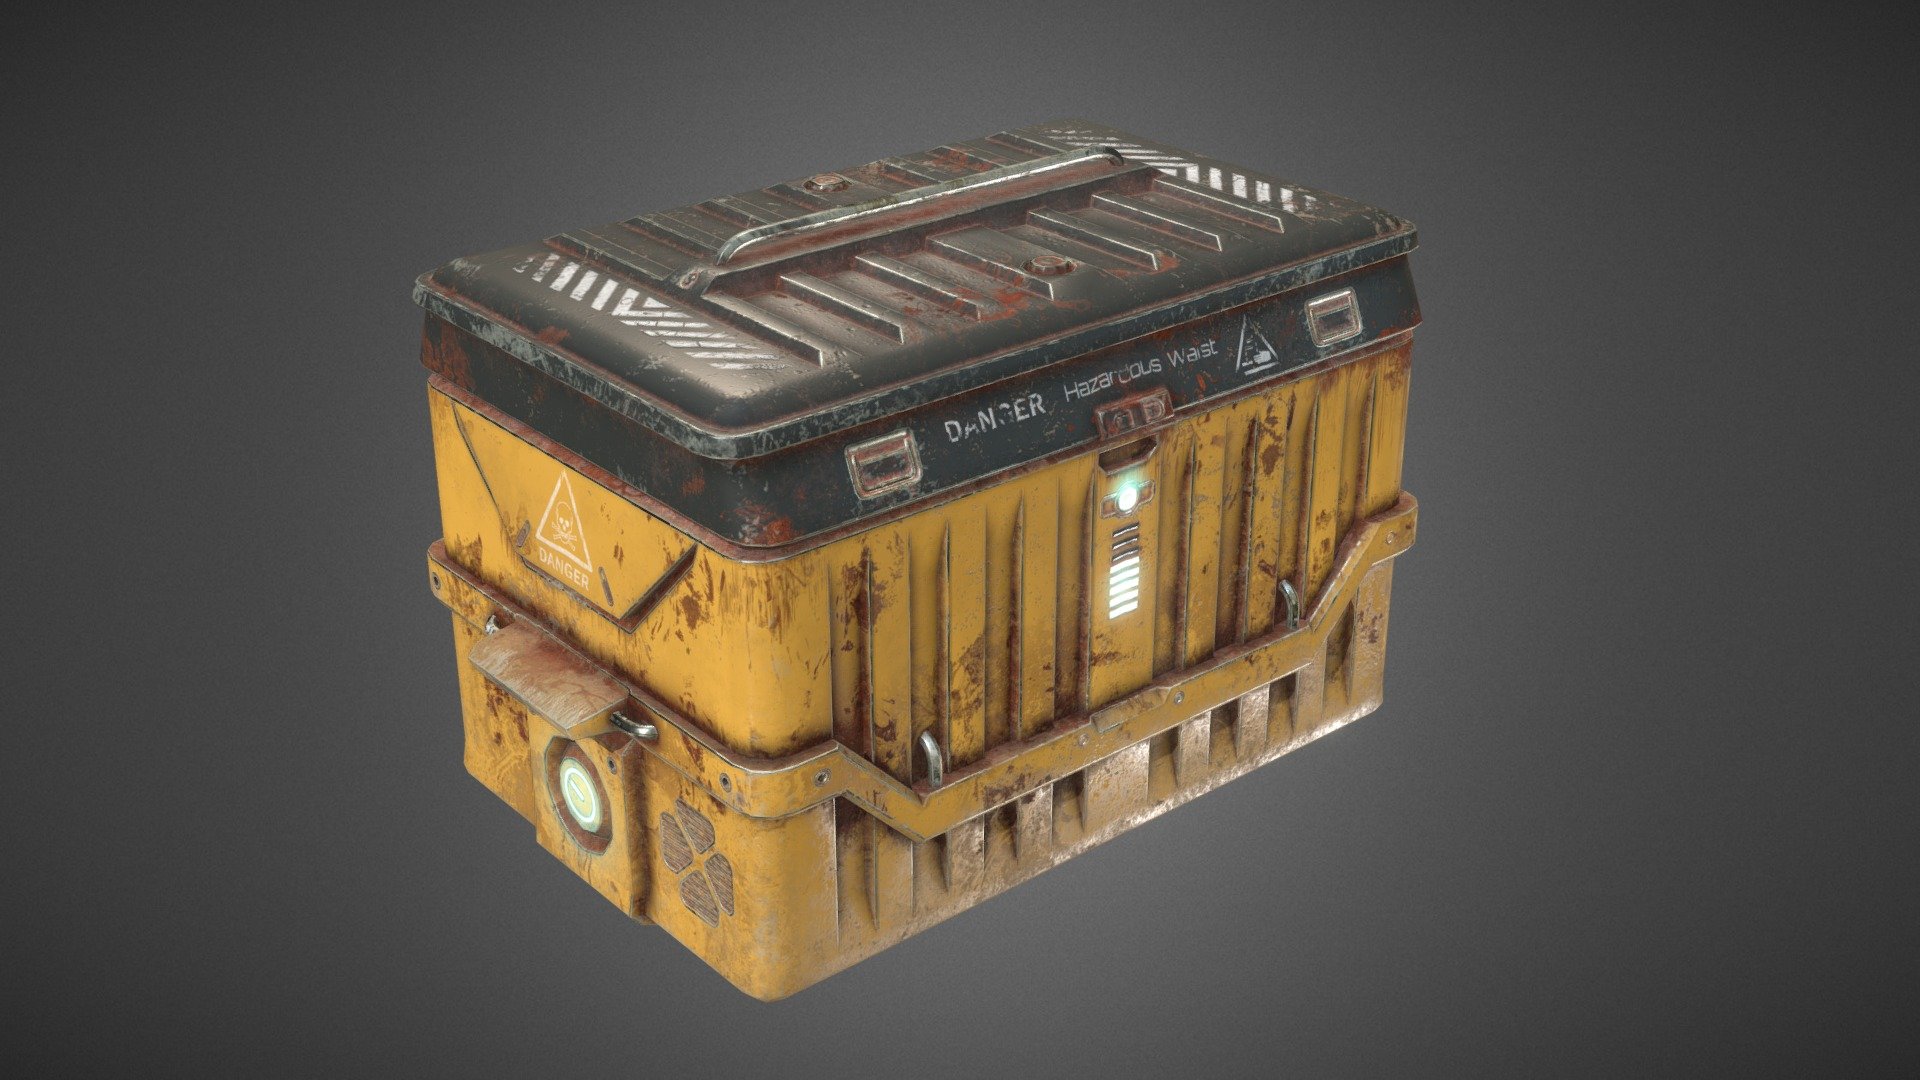 A trash-container thing made for an sci-fi environment / school project

Made with Blender and Substance - Sci-fi Container - 3D model by Mxk 3d model